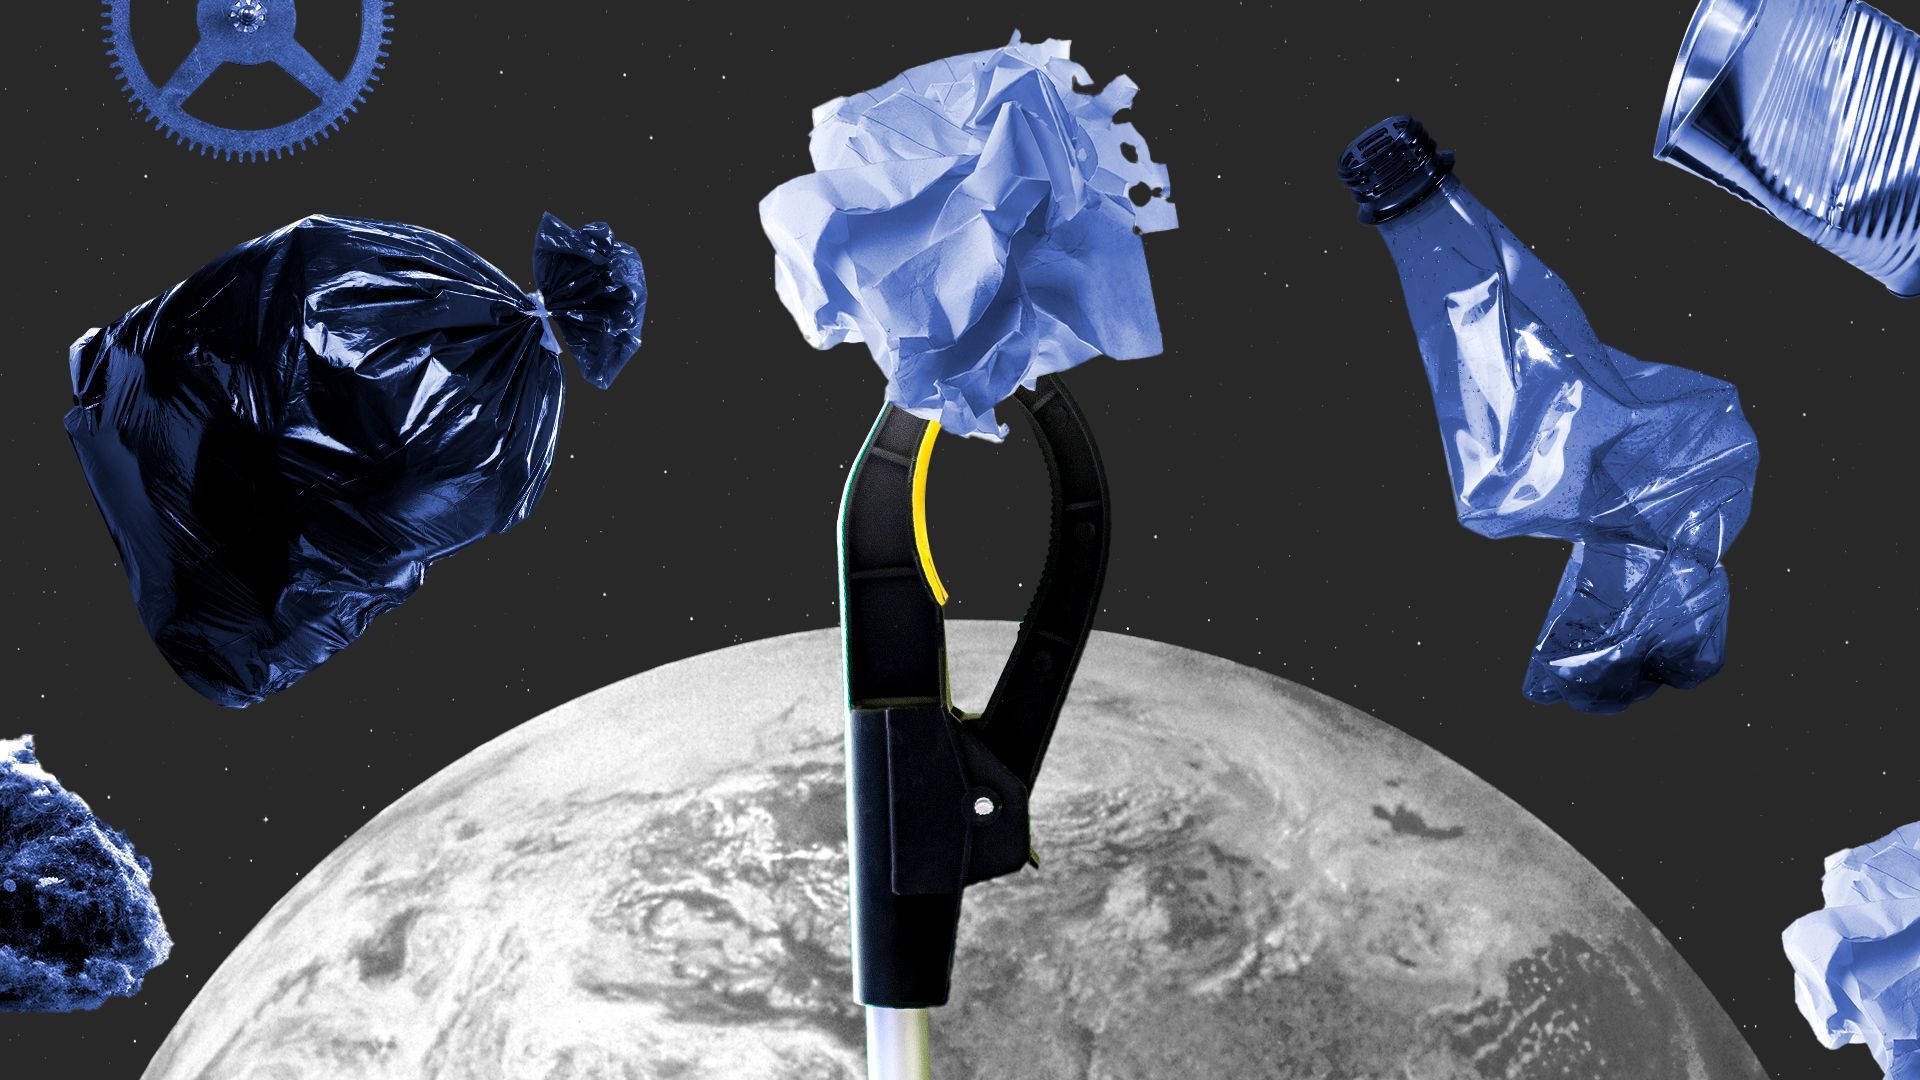 Illustration of a trash picker pulling garbage from space